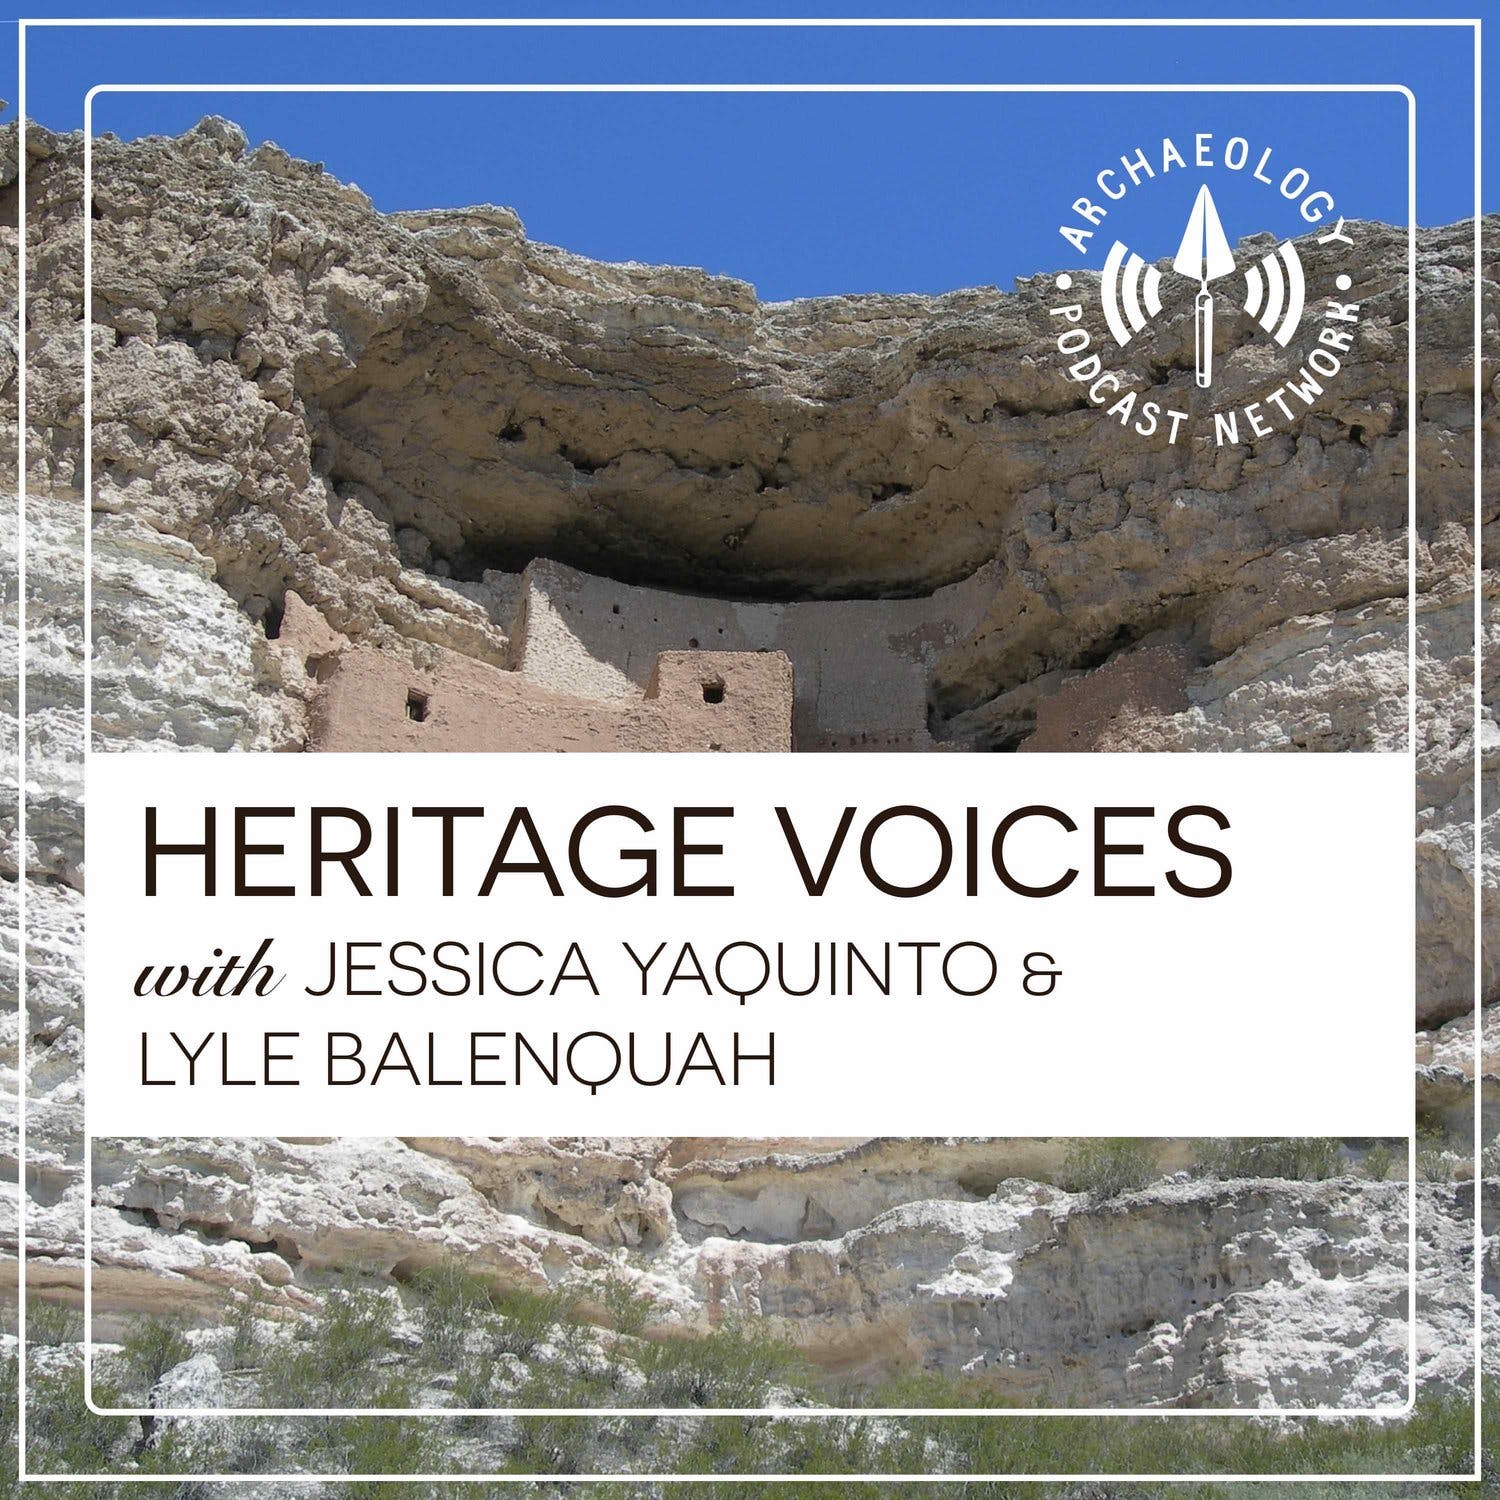 Introducing Heritage Voices - Episode 0